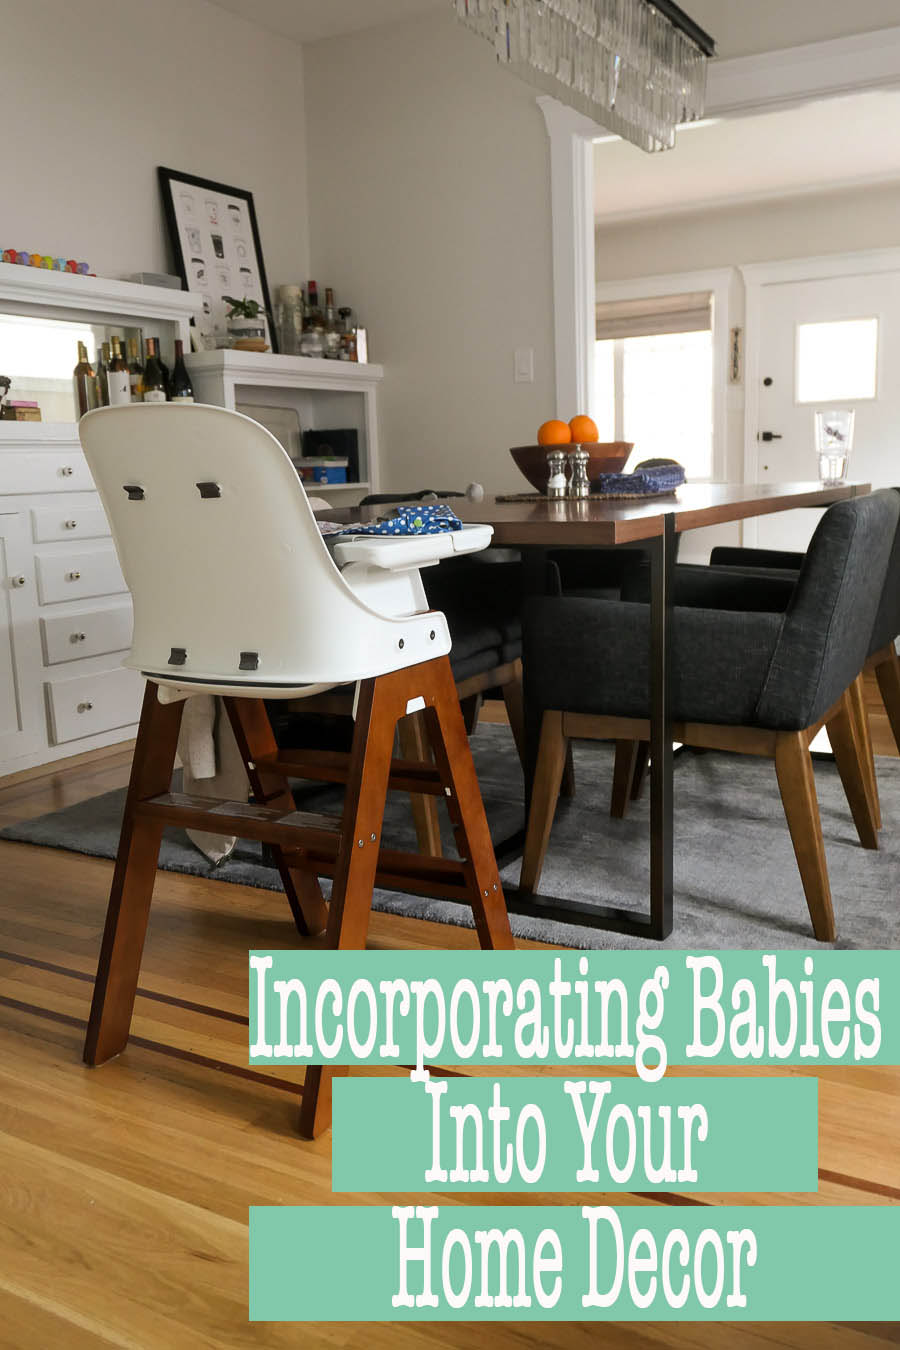 Tips and Ideas for Incorporating Babies Into Your Home Decor. How to organize baby stuff in living room and home. Don't let baby gear take over your home.